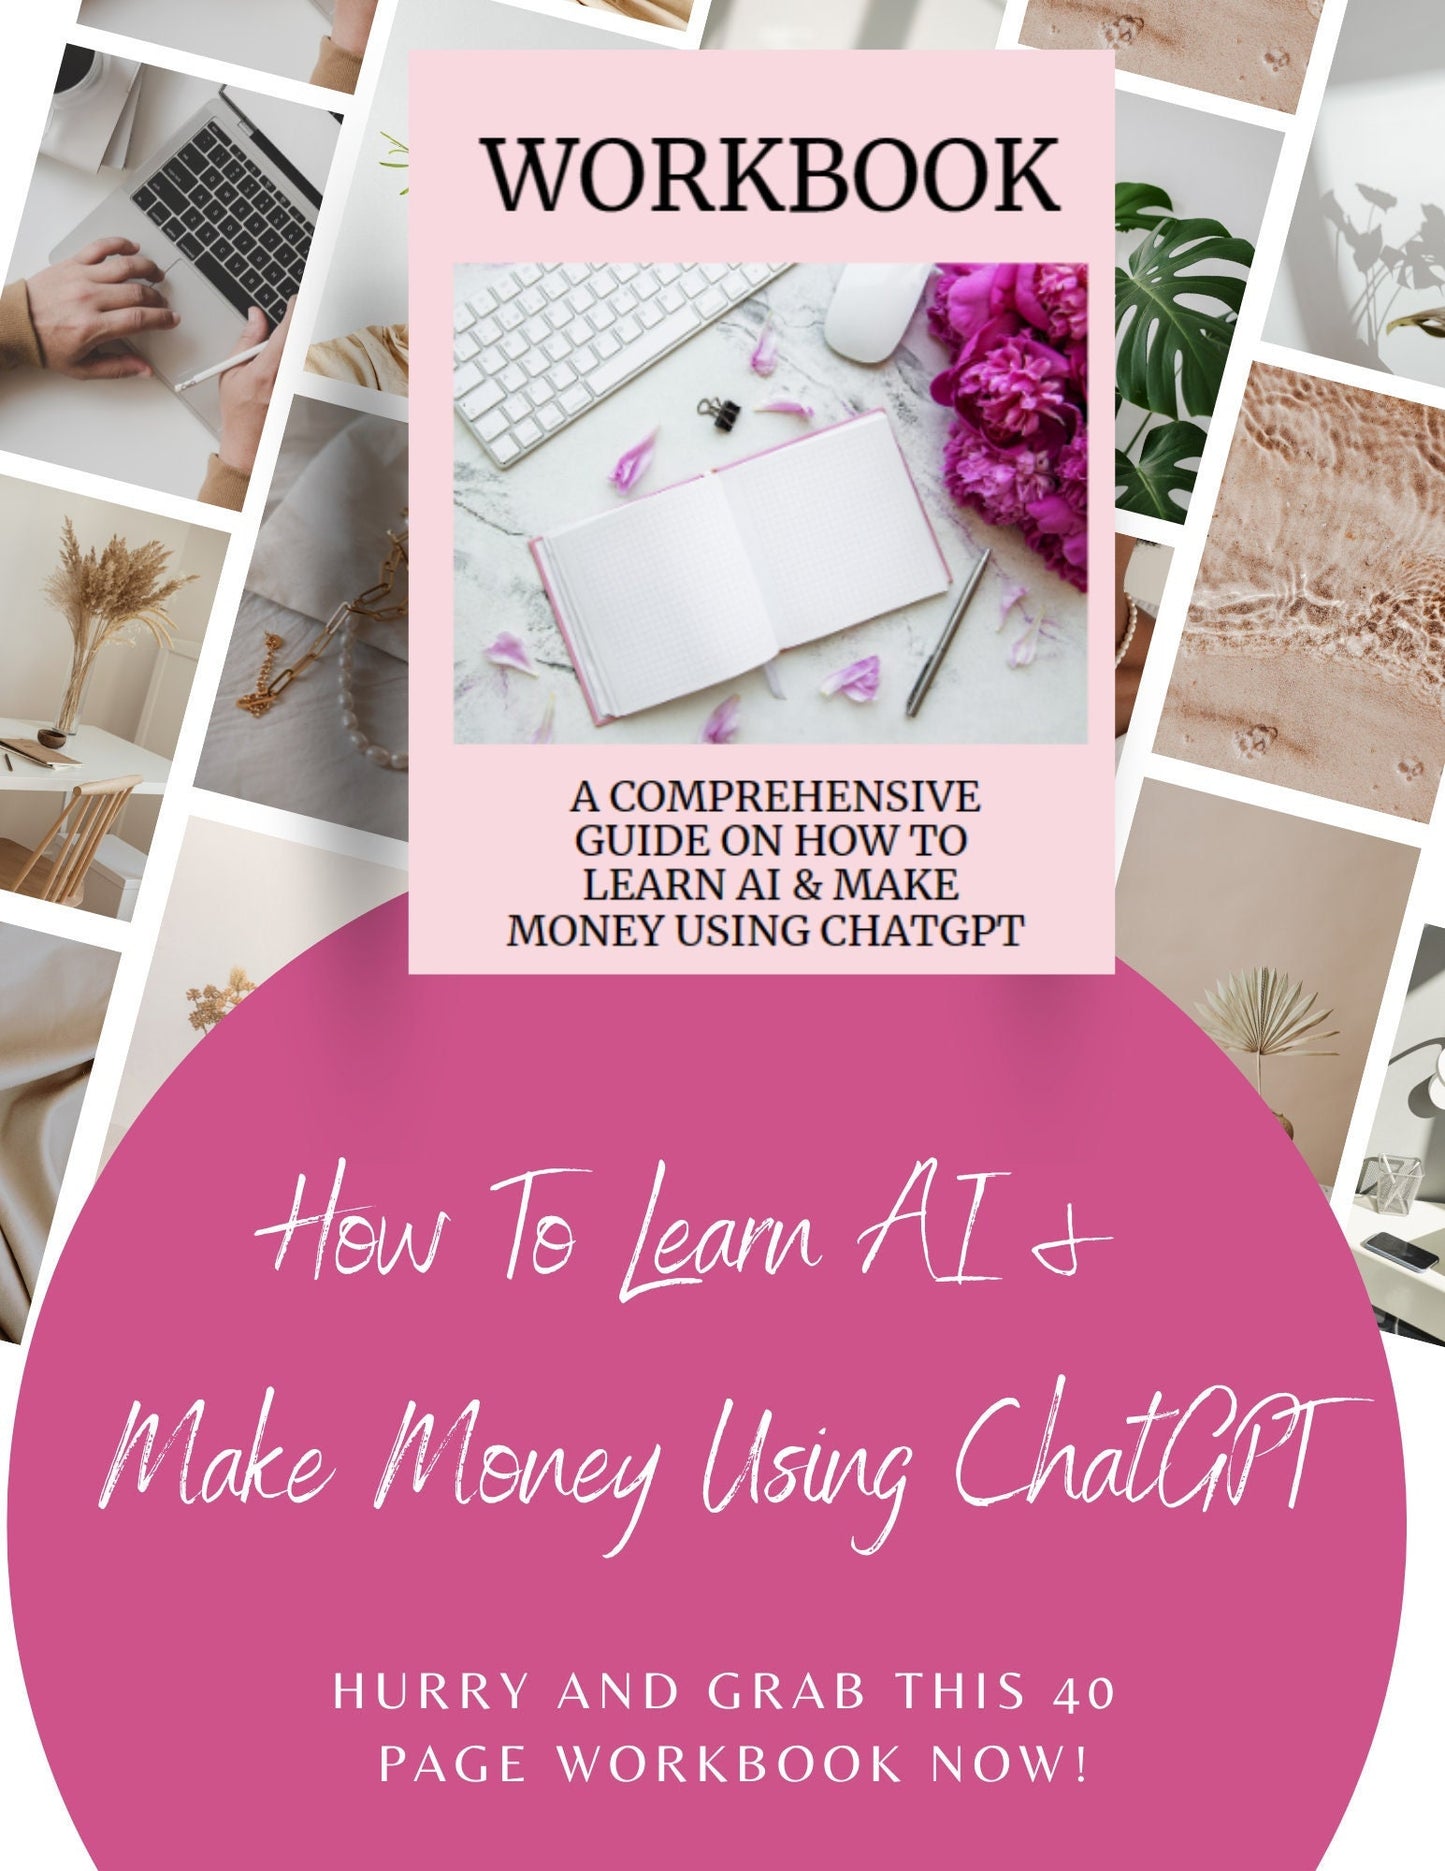 How To Learn AI & Make Money Using ChatGPT - Complete Workbook